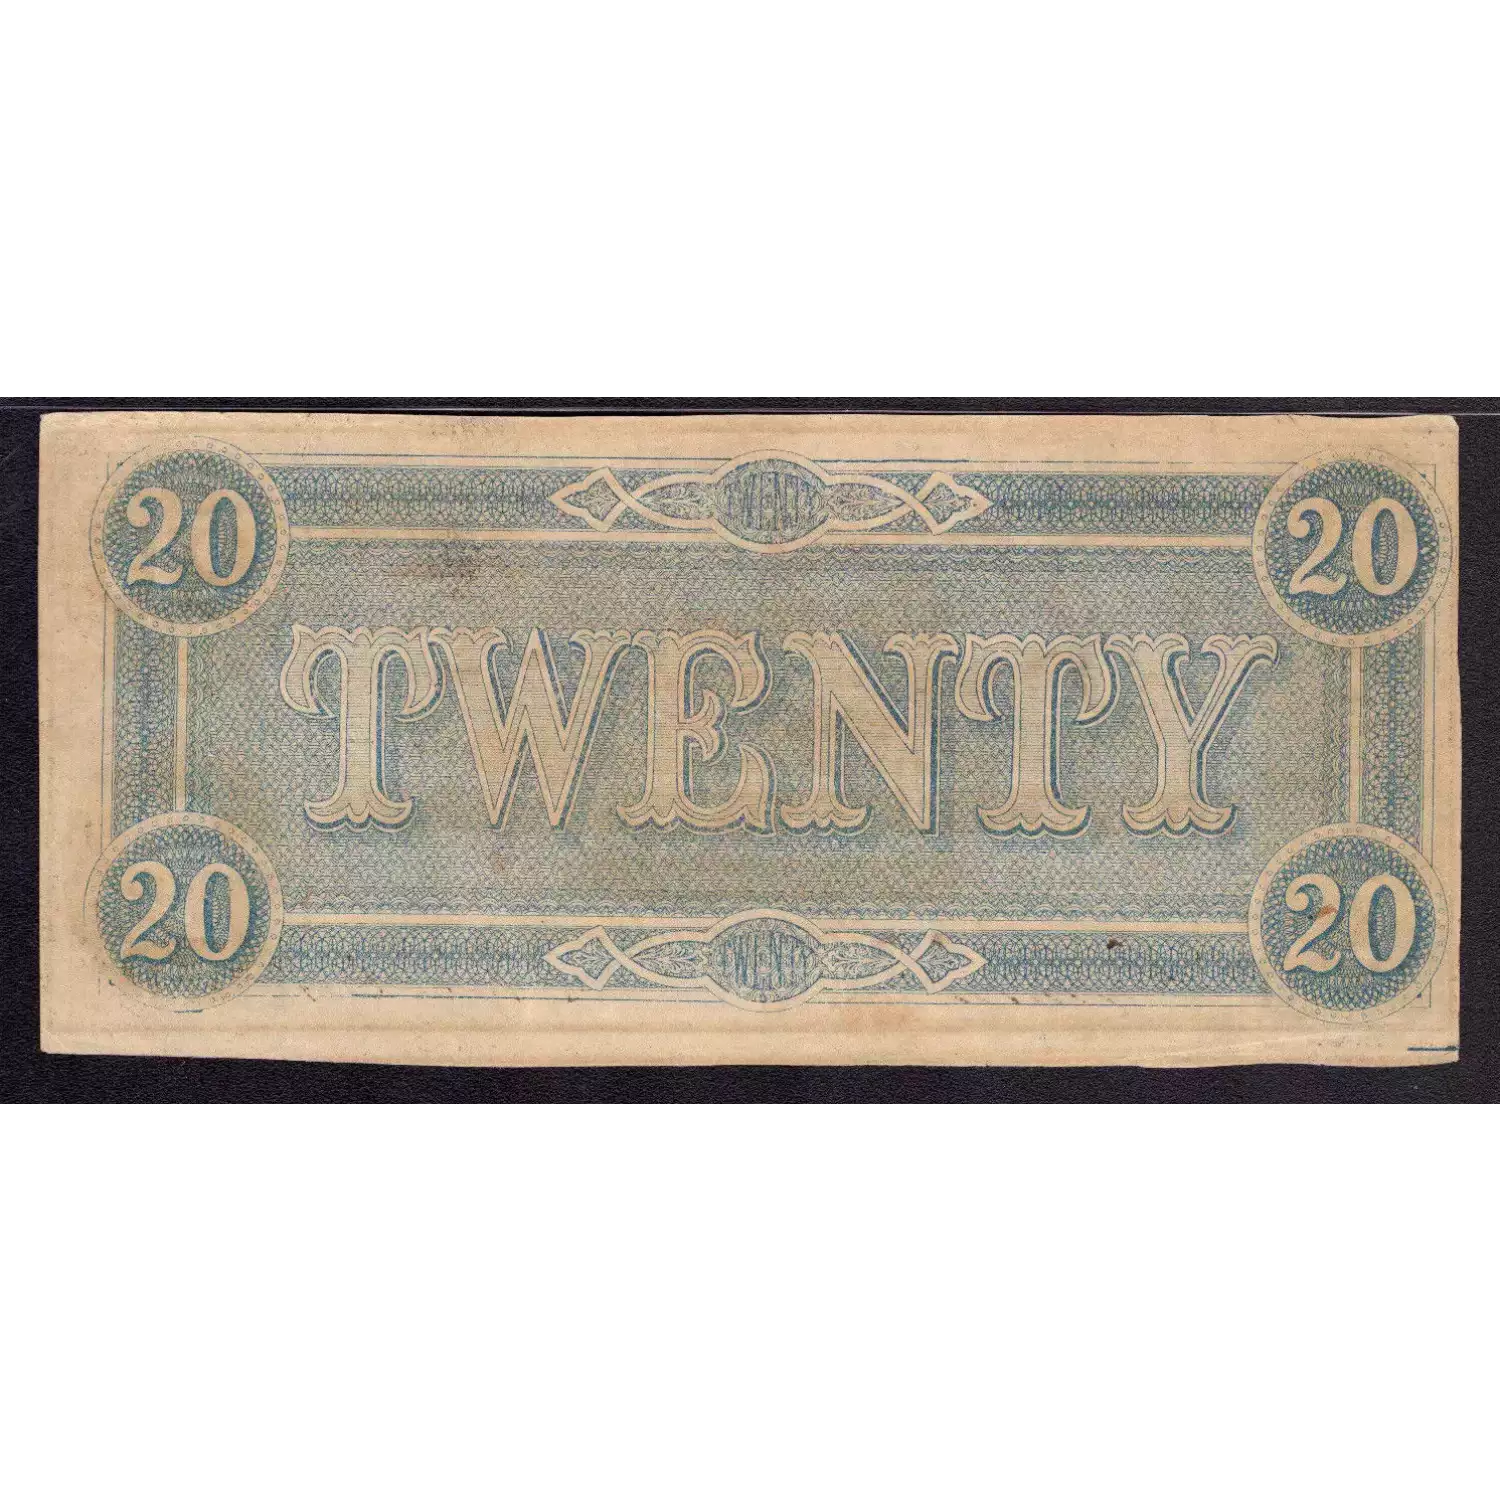 2s6d March 13, 1755  COLONIAL CURRENCY CT-67 (4)